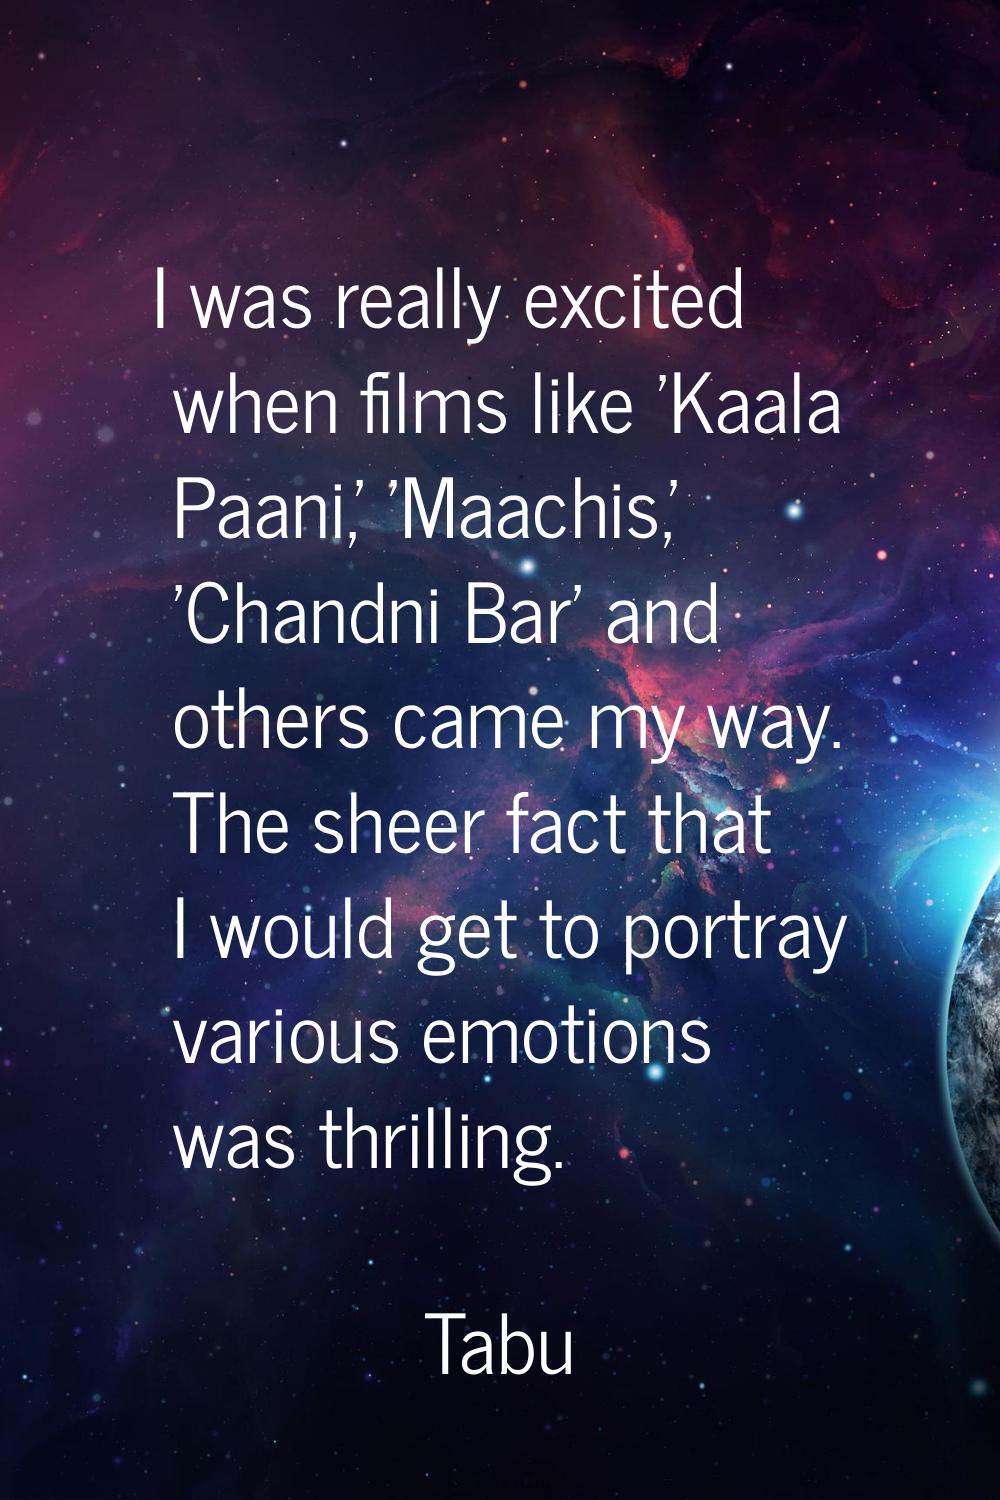 I was really excited when films like 'Kaala Paani,' 'Maachis,' 'Chandni Bar' and others came my way